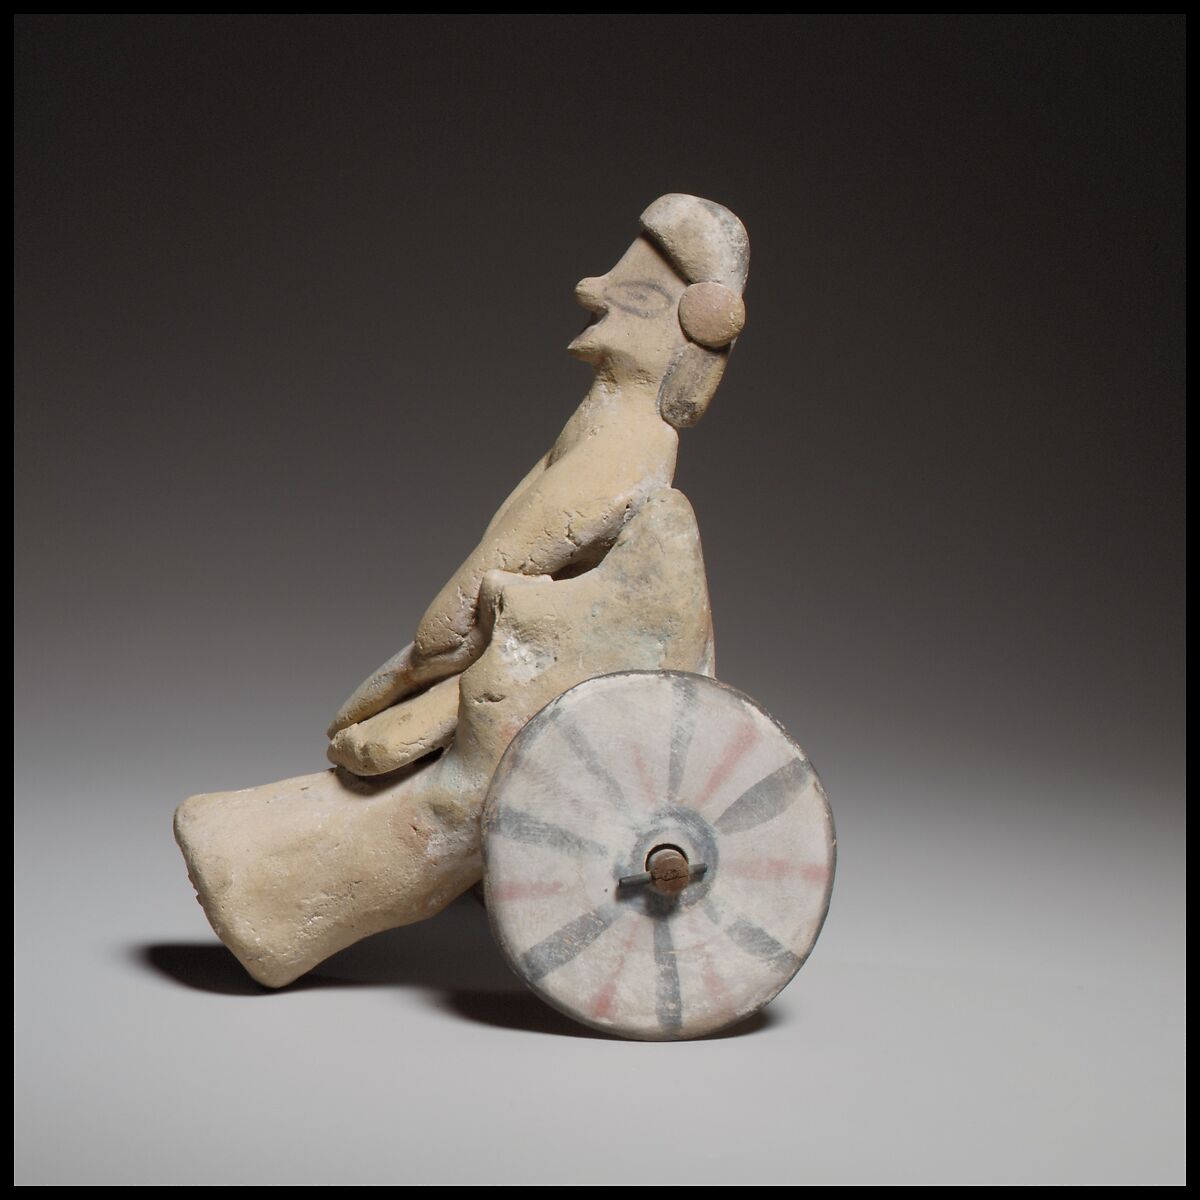 Model of a cart with a human figure, Terracotta, Cypriot 